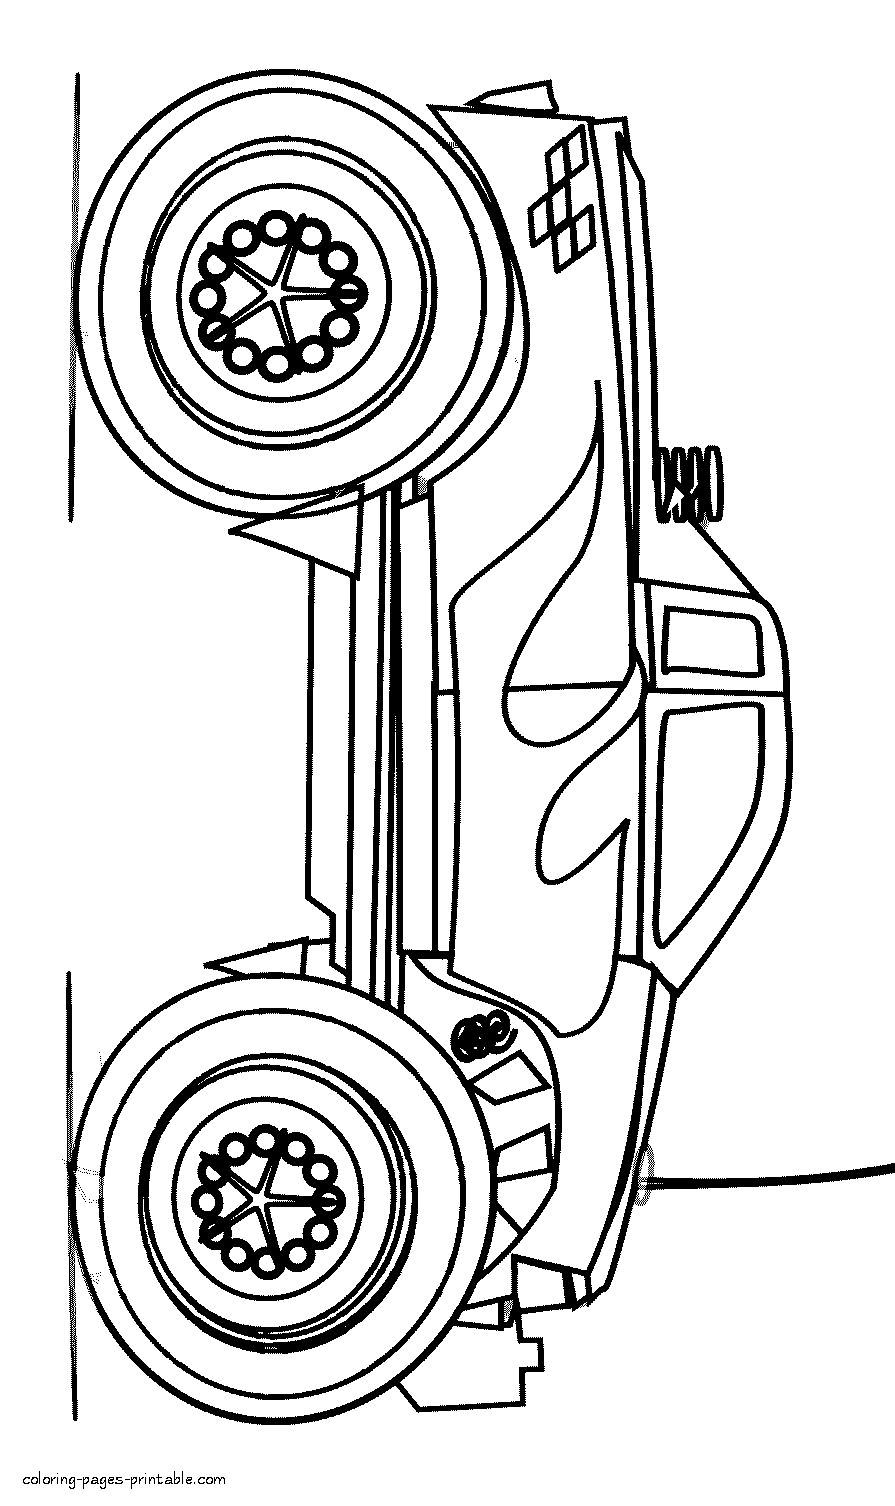 Simple monster truck coloring page for kid boys